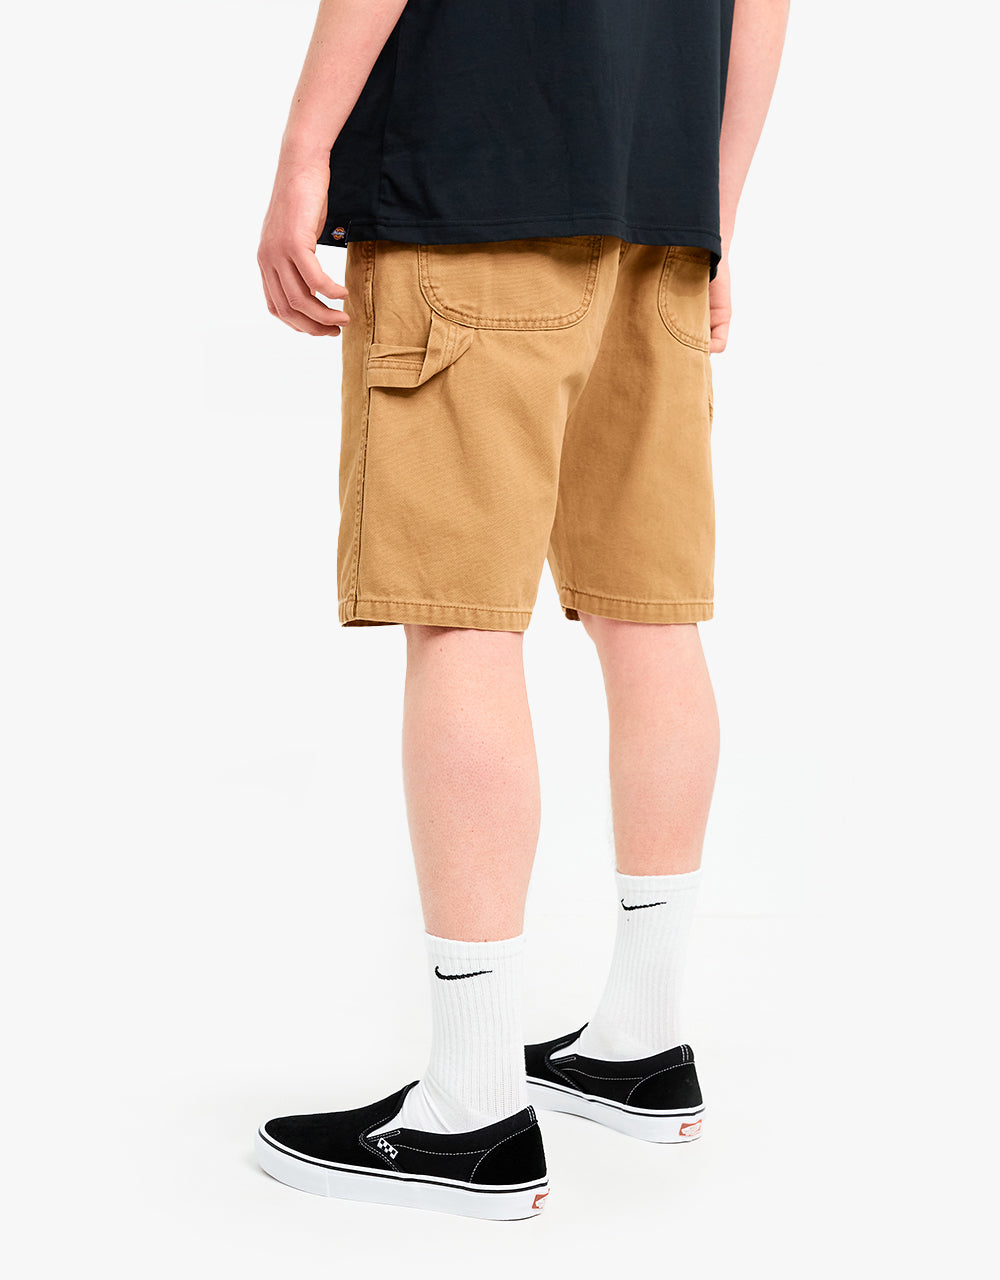 Dickies Duck Canvas Short - Stone Washed Brown Duck